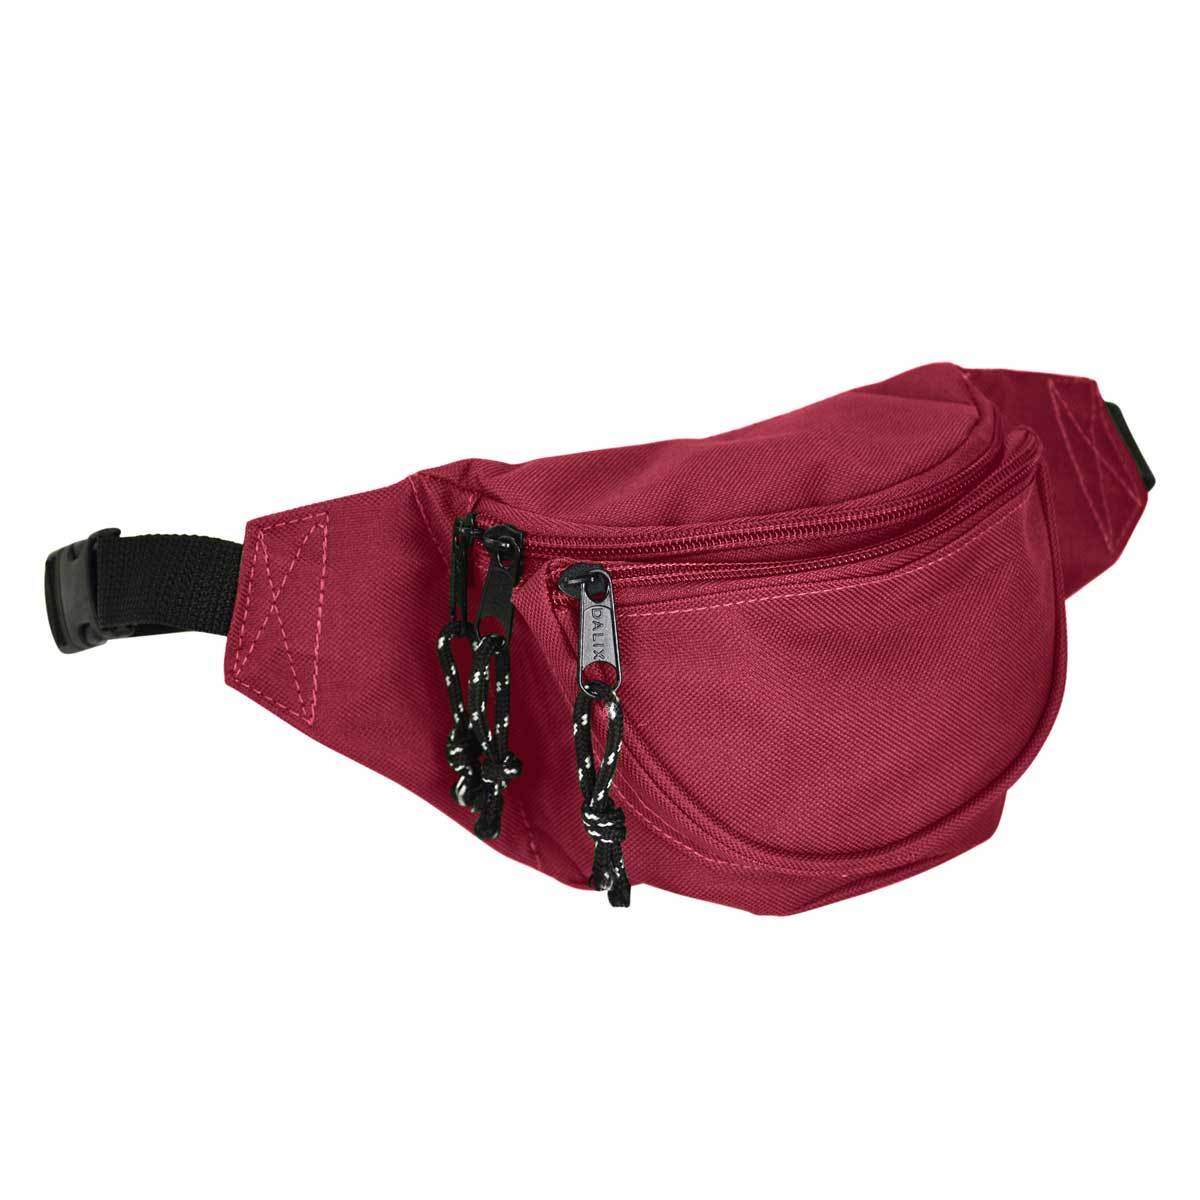 DALIX Fanny Pack w/ 3 Pockets Traveling Concealment Pouch Airport Money Bag FP-001 Fanny Packs DALIX Maroon 